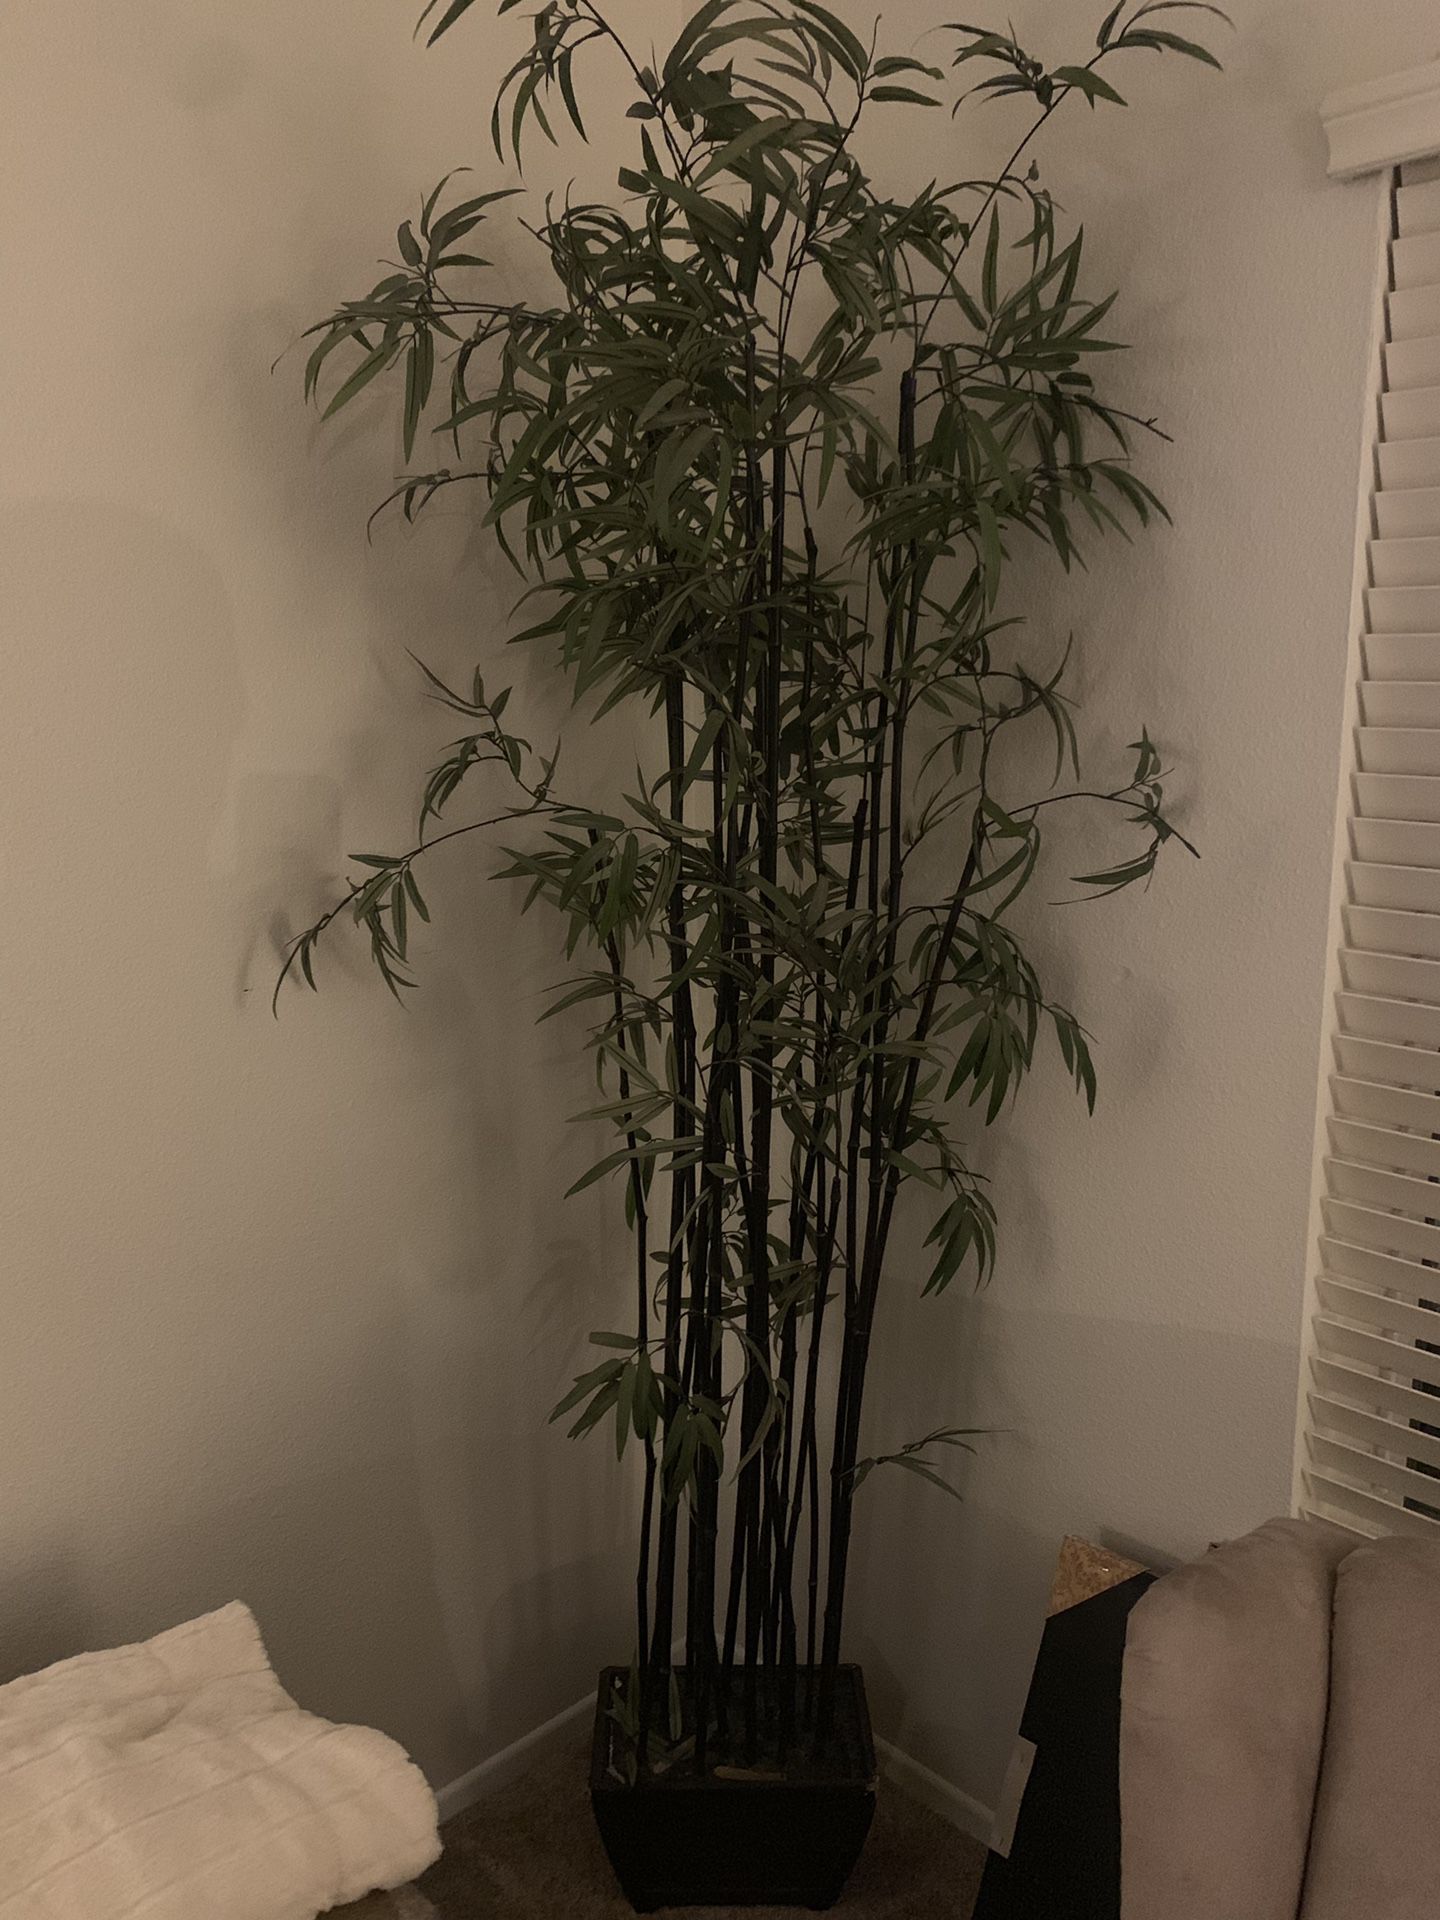 Pier 1 faux bamboo plant - 7’ tall